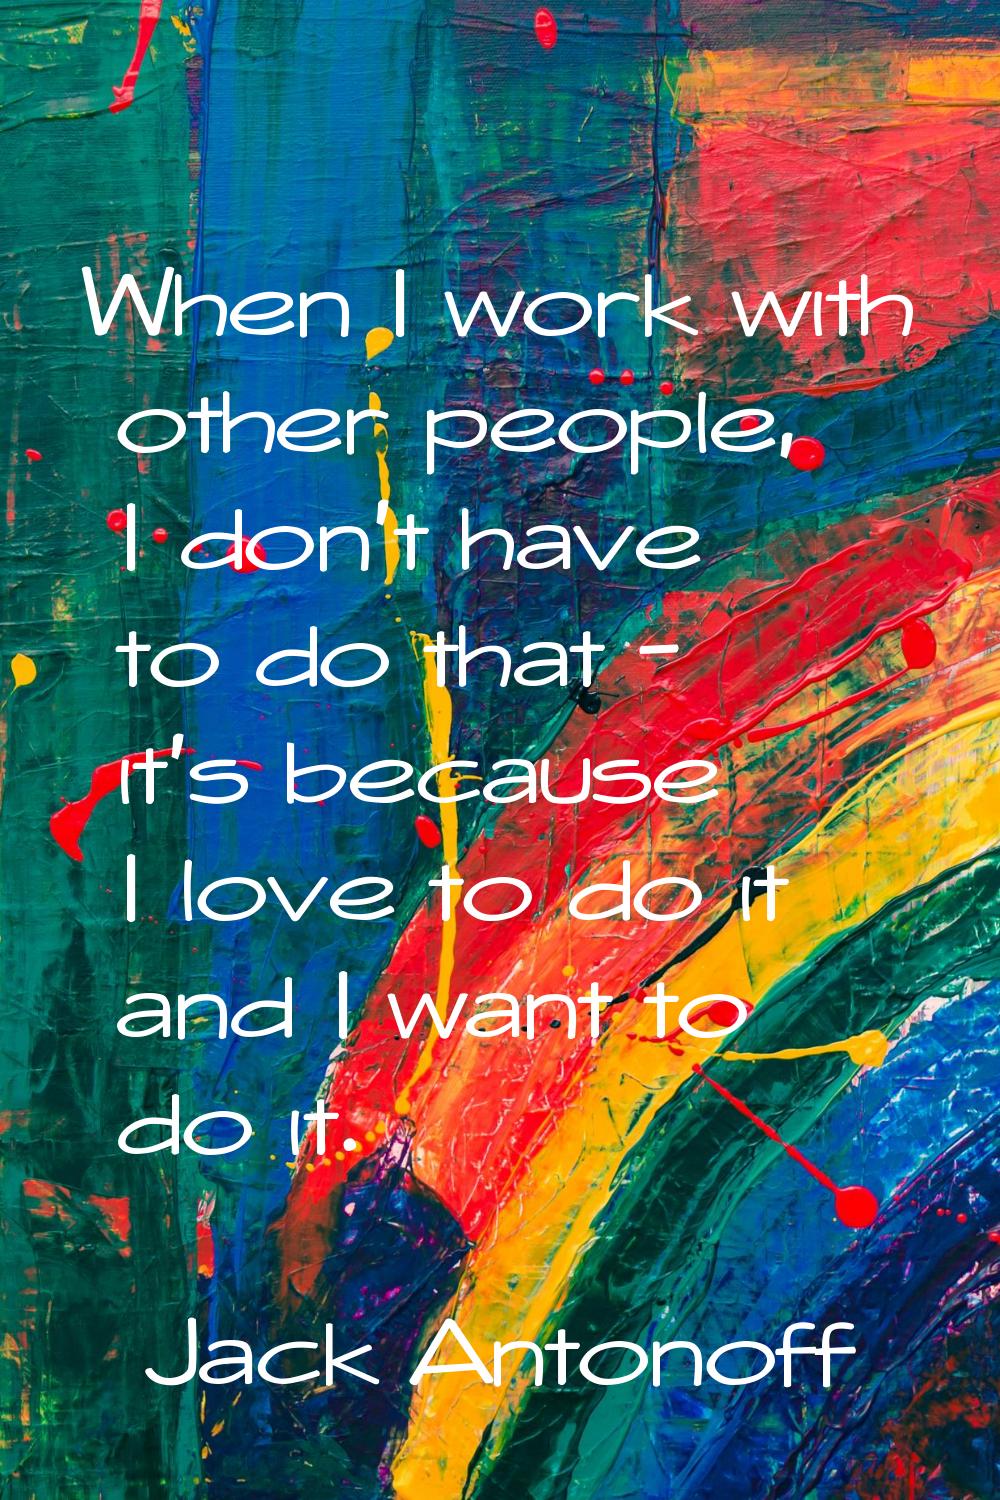 When I work with other people, I don't have to do that - it's because I love to do it and I want to